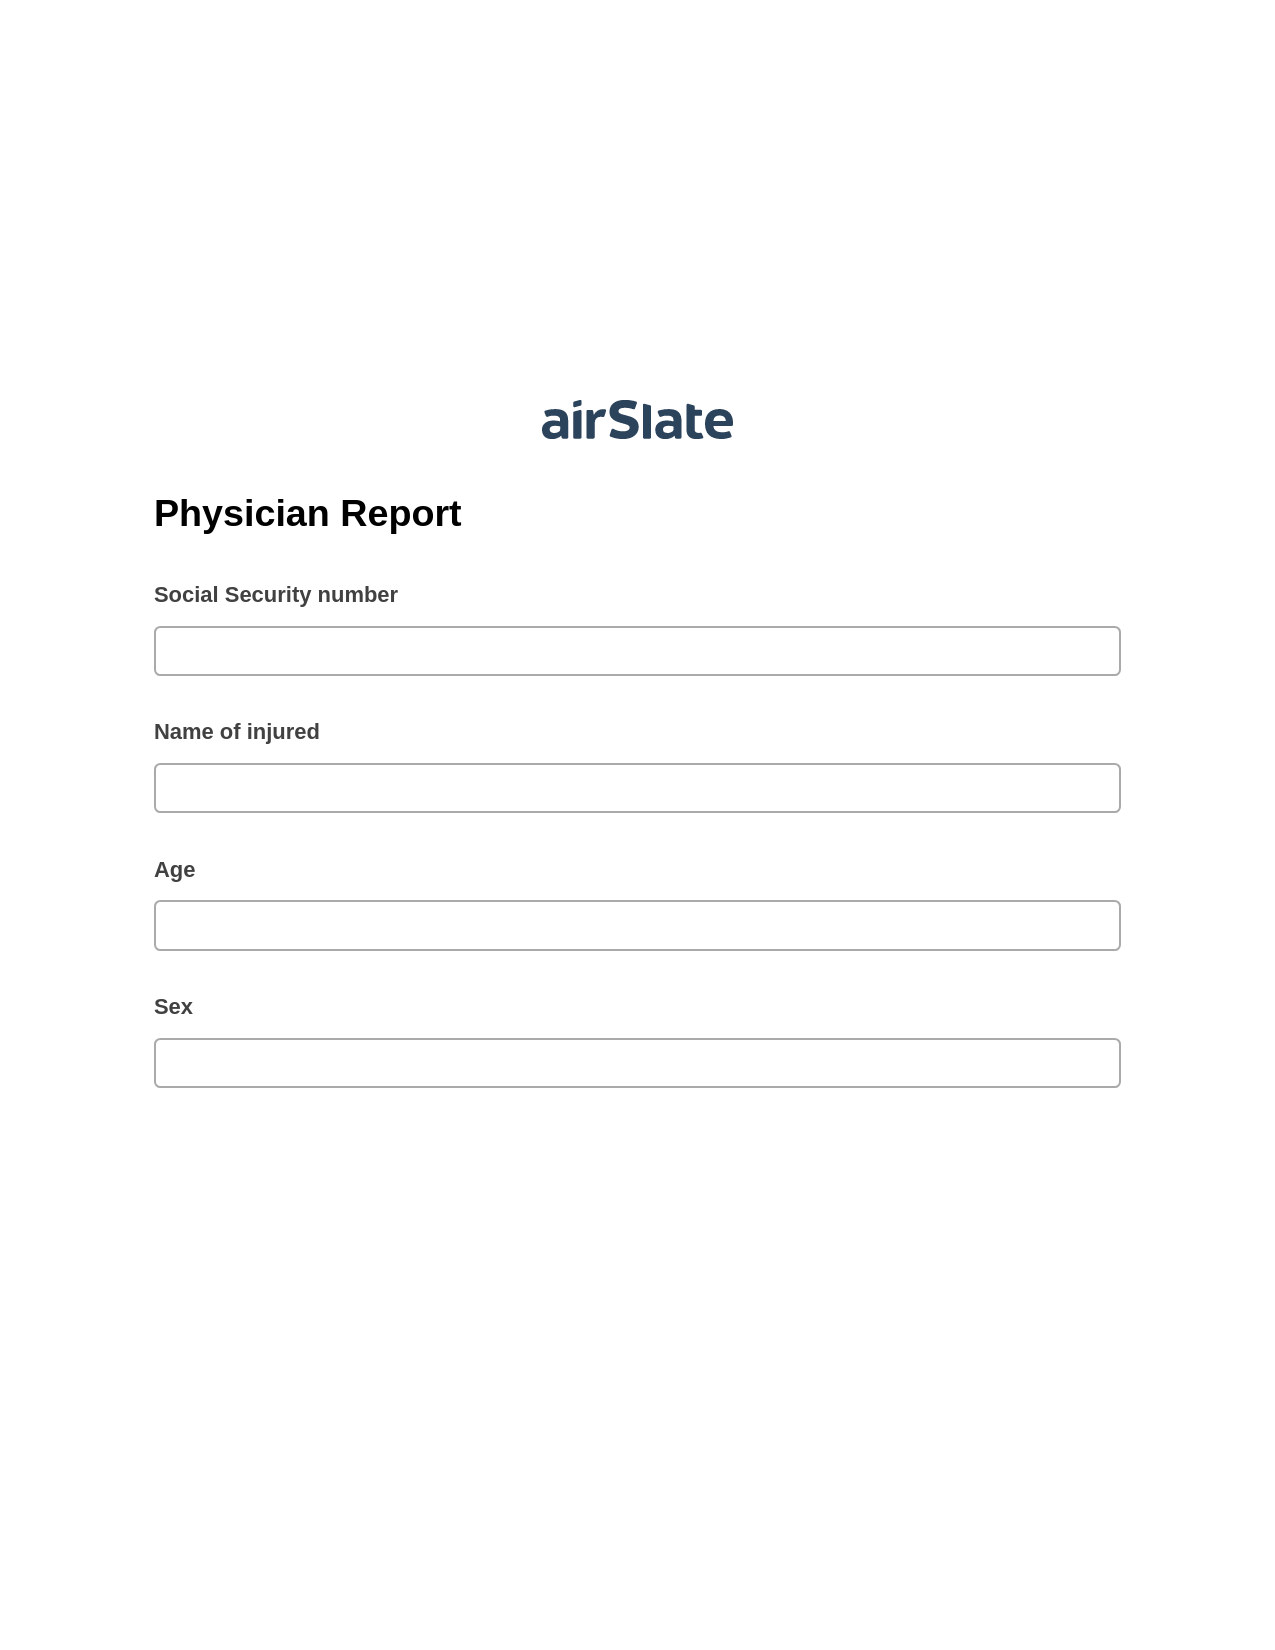 Multirole Physician Report Pre-fill from MS Dynamics 365 Records, Update Audit Trail Bot, Archive to Box Bot